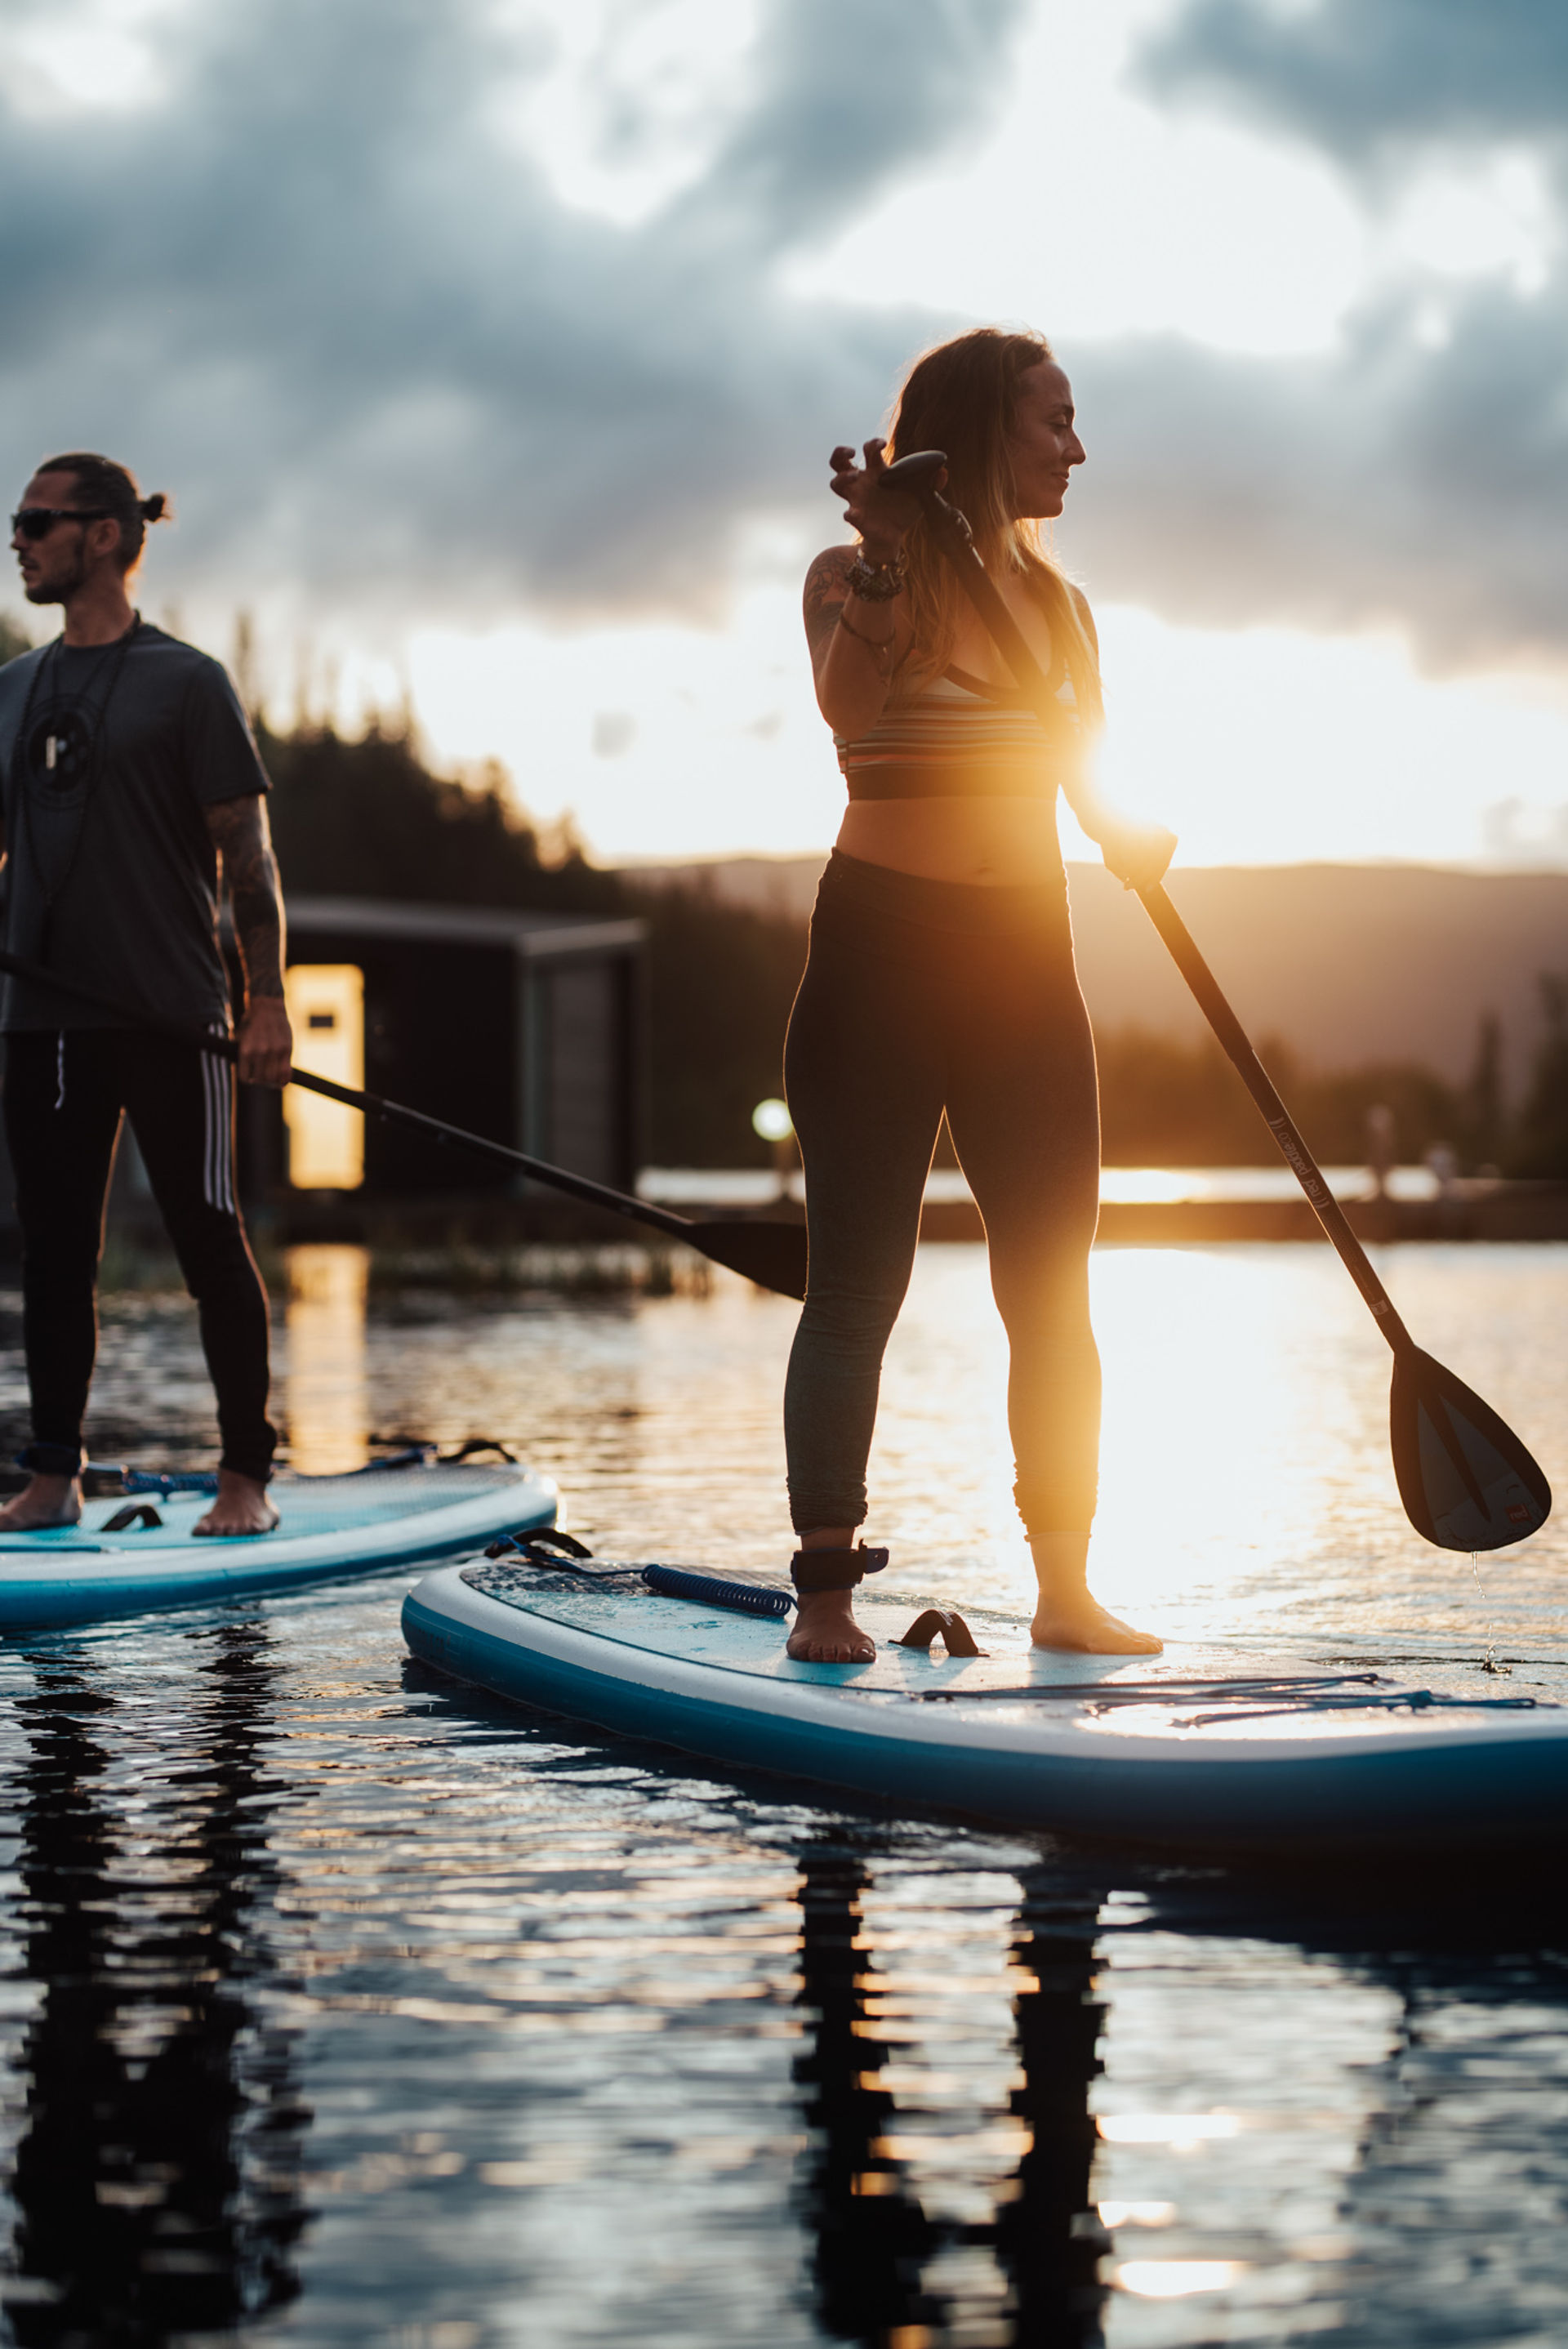 SUP - Stand up paddleboard